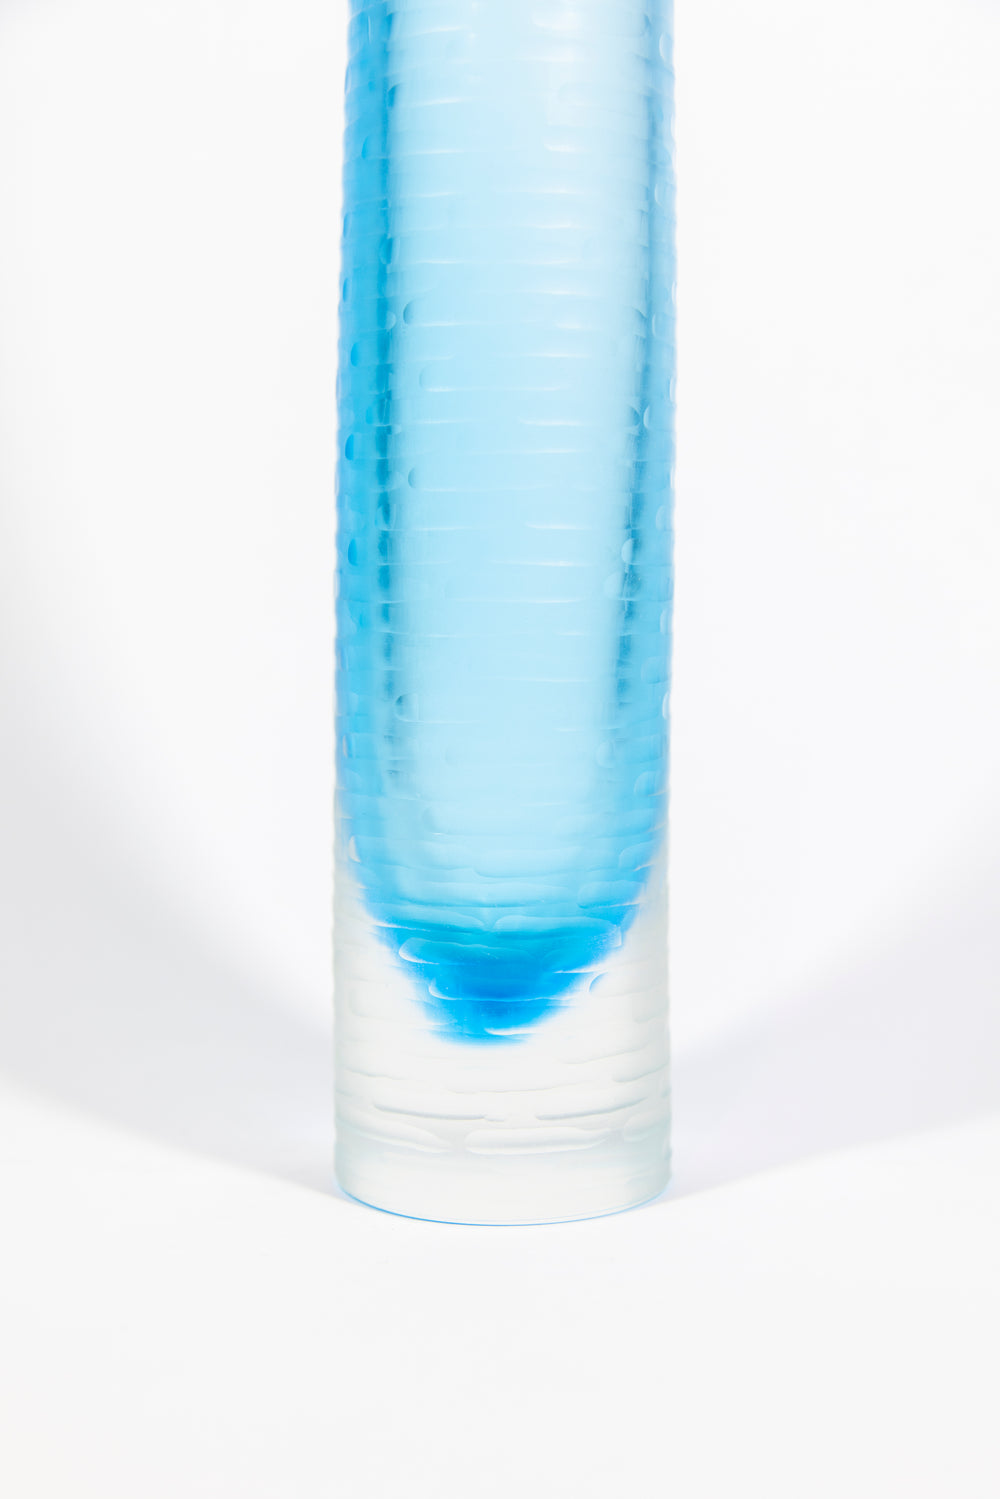 Etched Tall Blue Vase